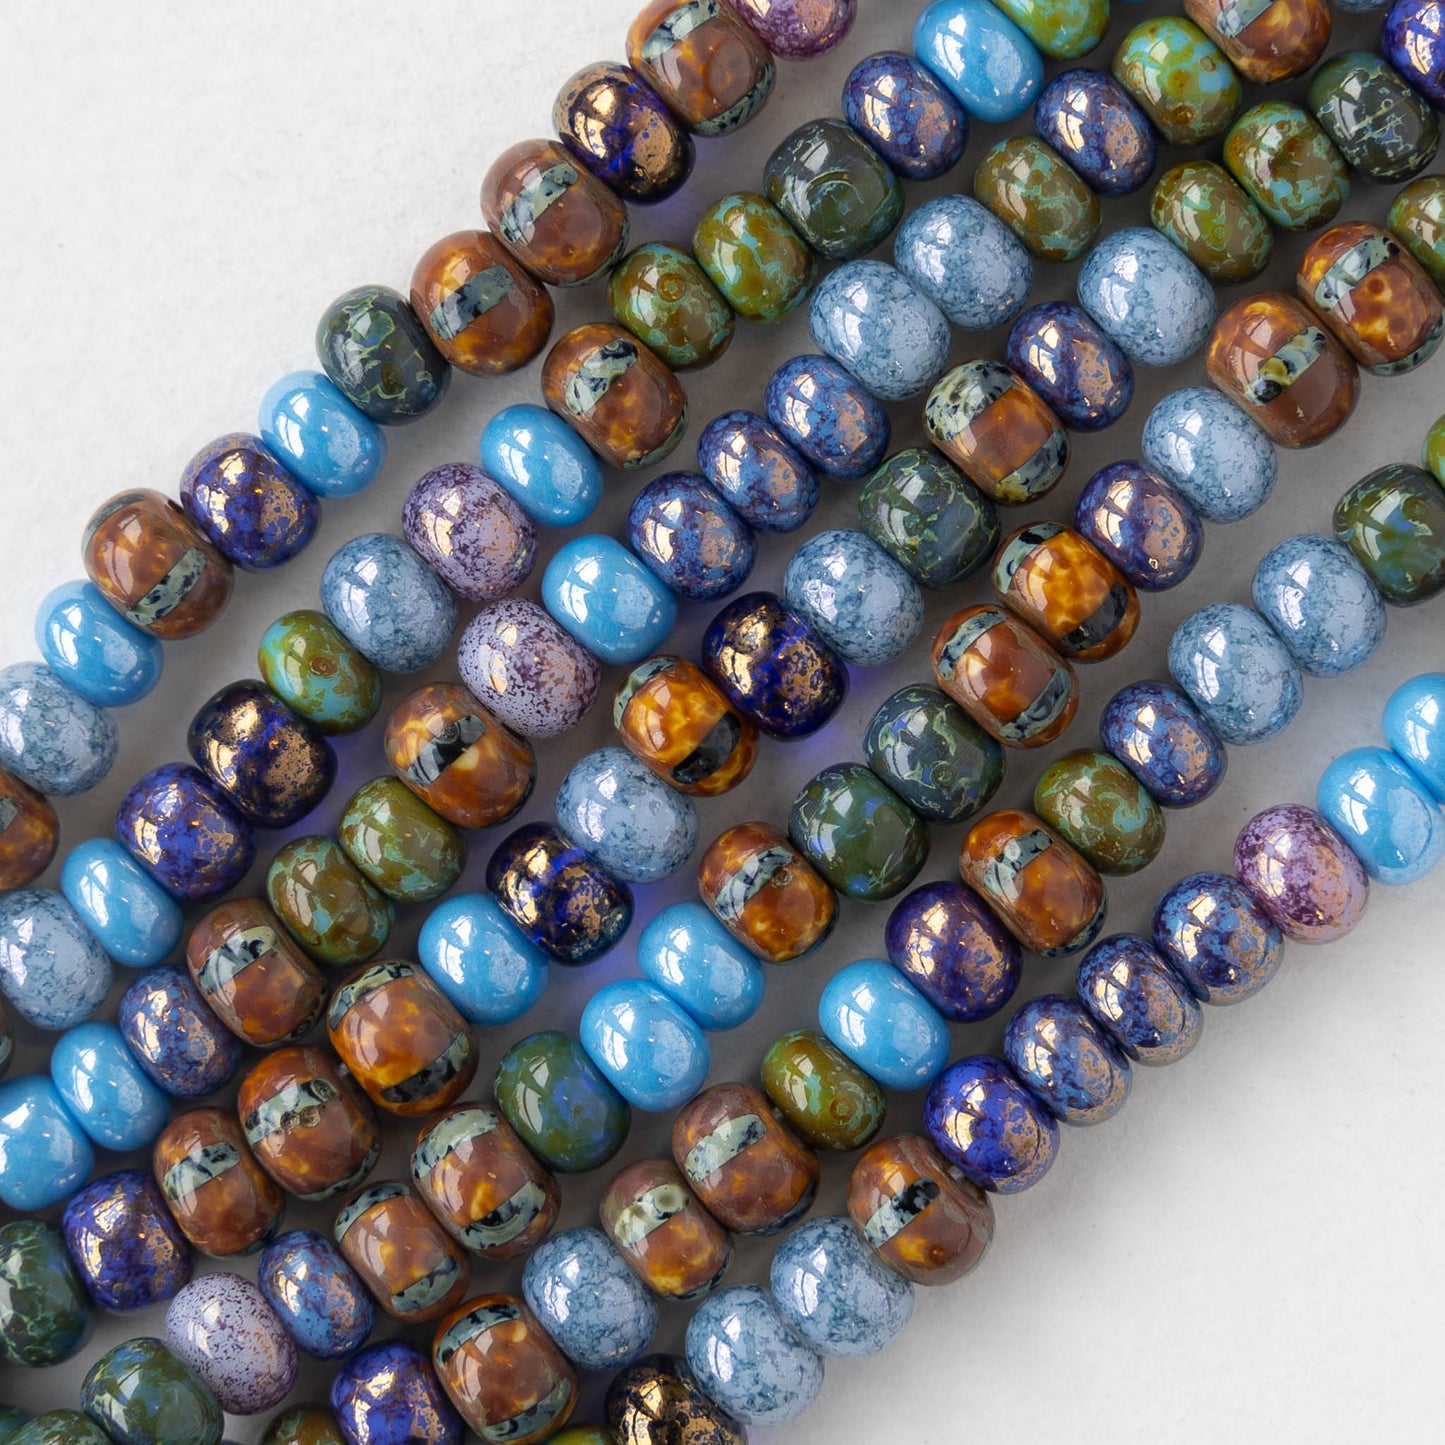 Large Size 2/0 -3/0 Picasso Striped Seed Beads - Blue Lavender Striped Mix - Choose Amount